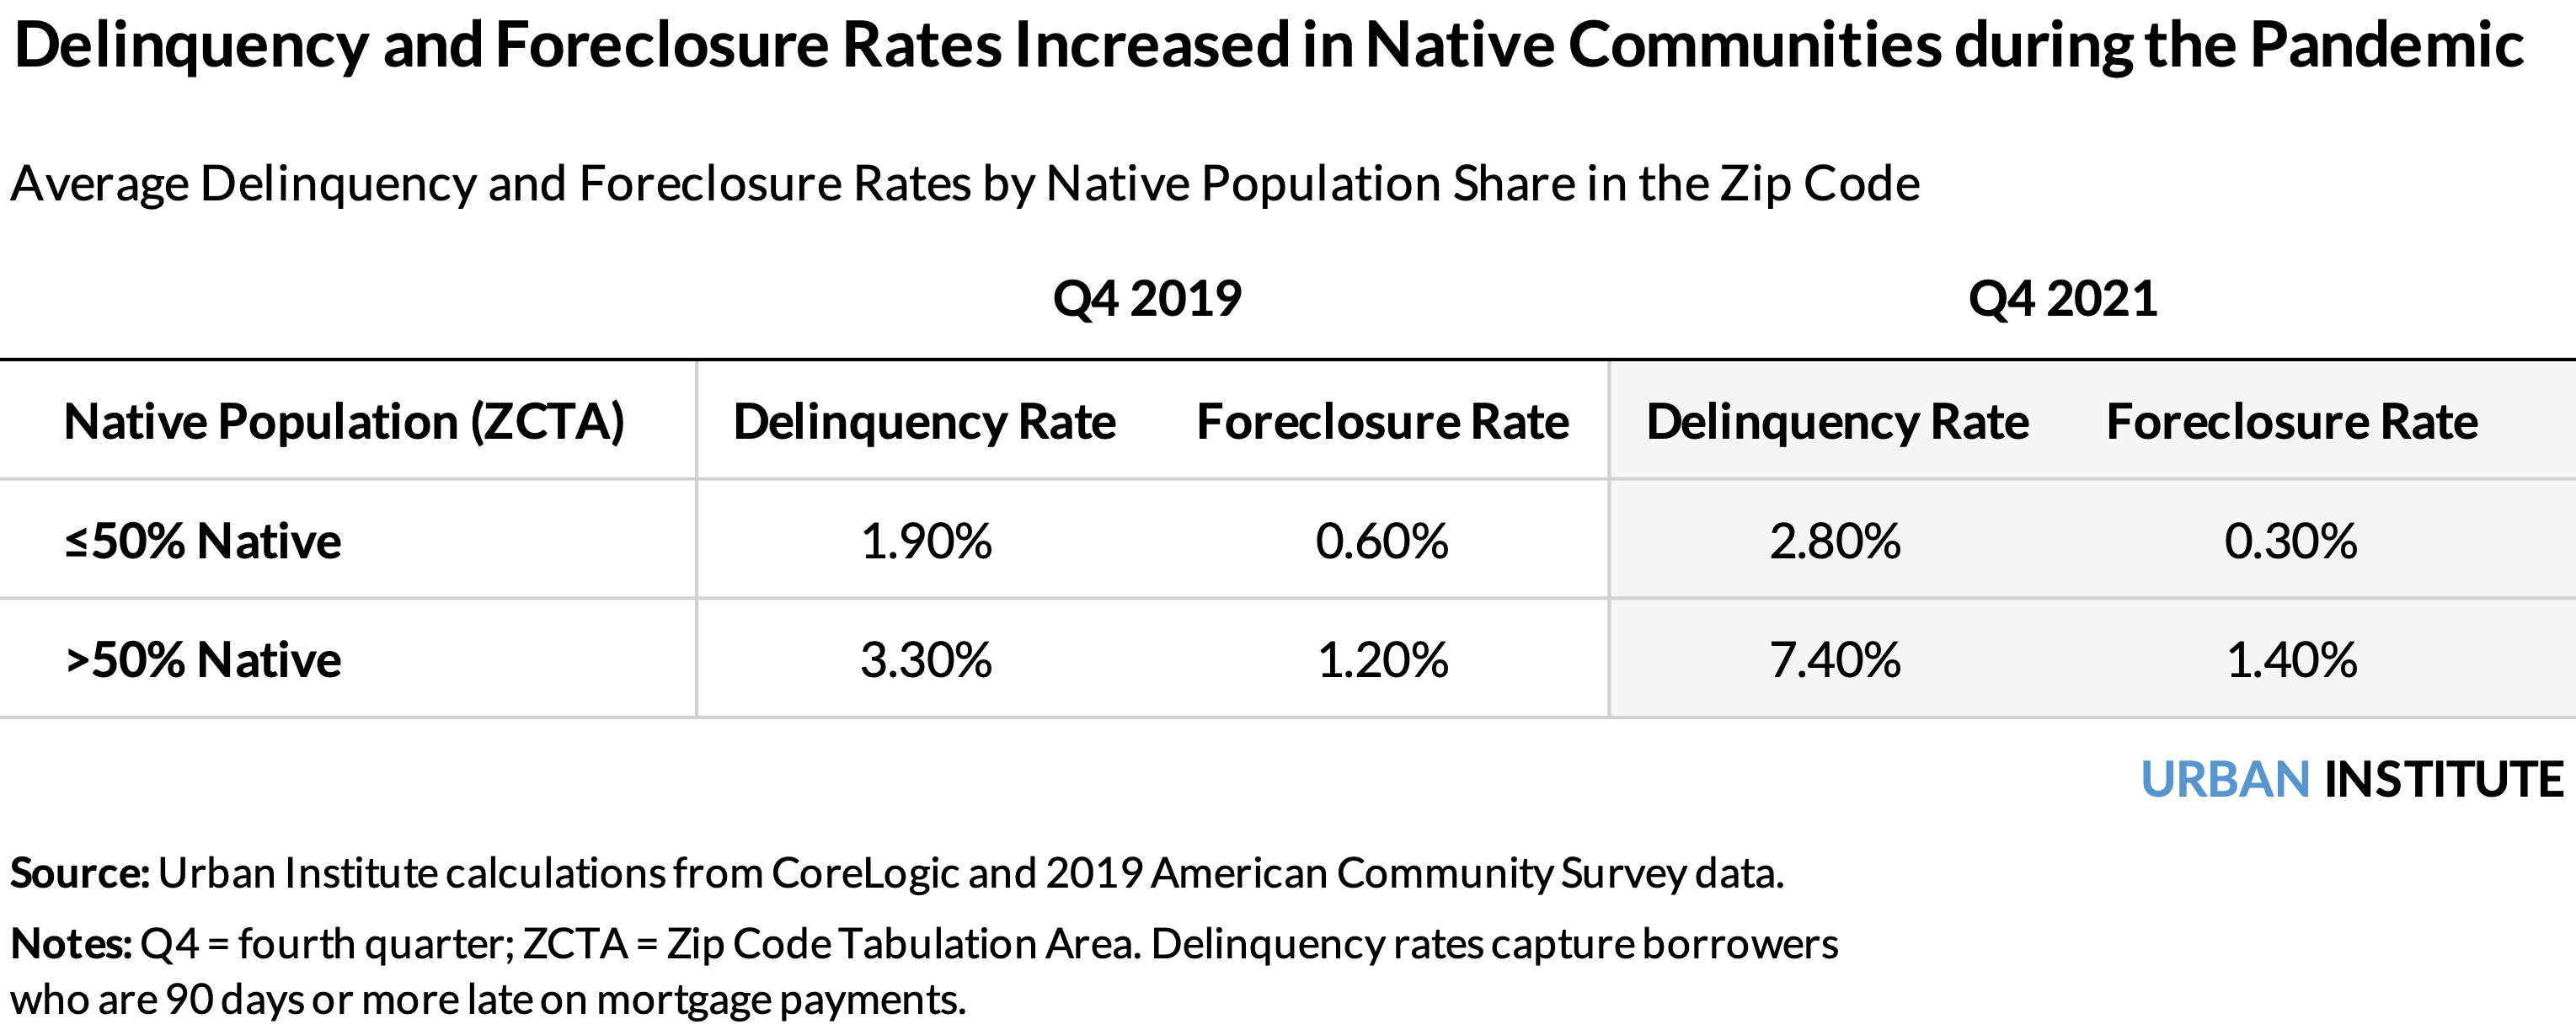 Table showing delinquency and foreclosure rates in Q4 of 2019 compared with Q4 of 2021. Delinquency and foreclosure rates increased in Native communities during the pandemic. 